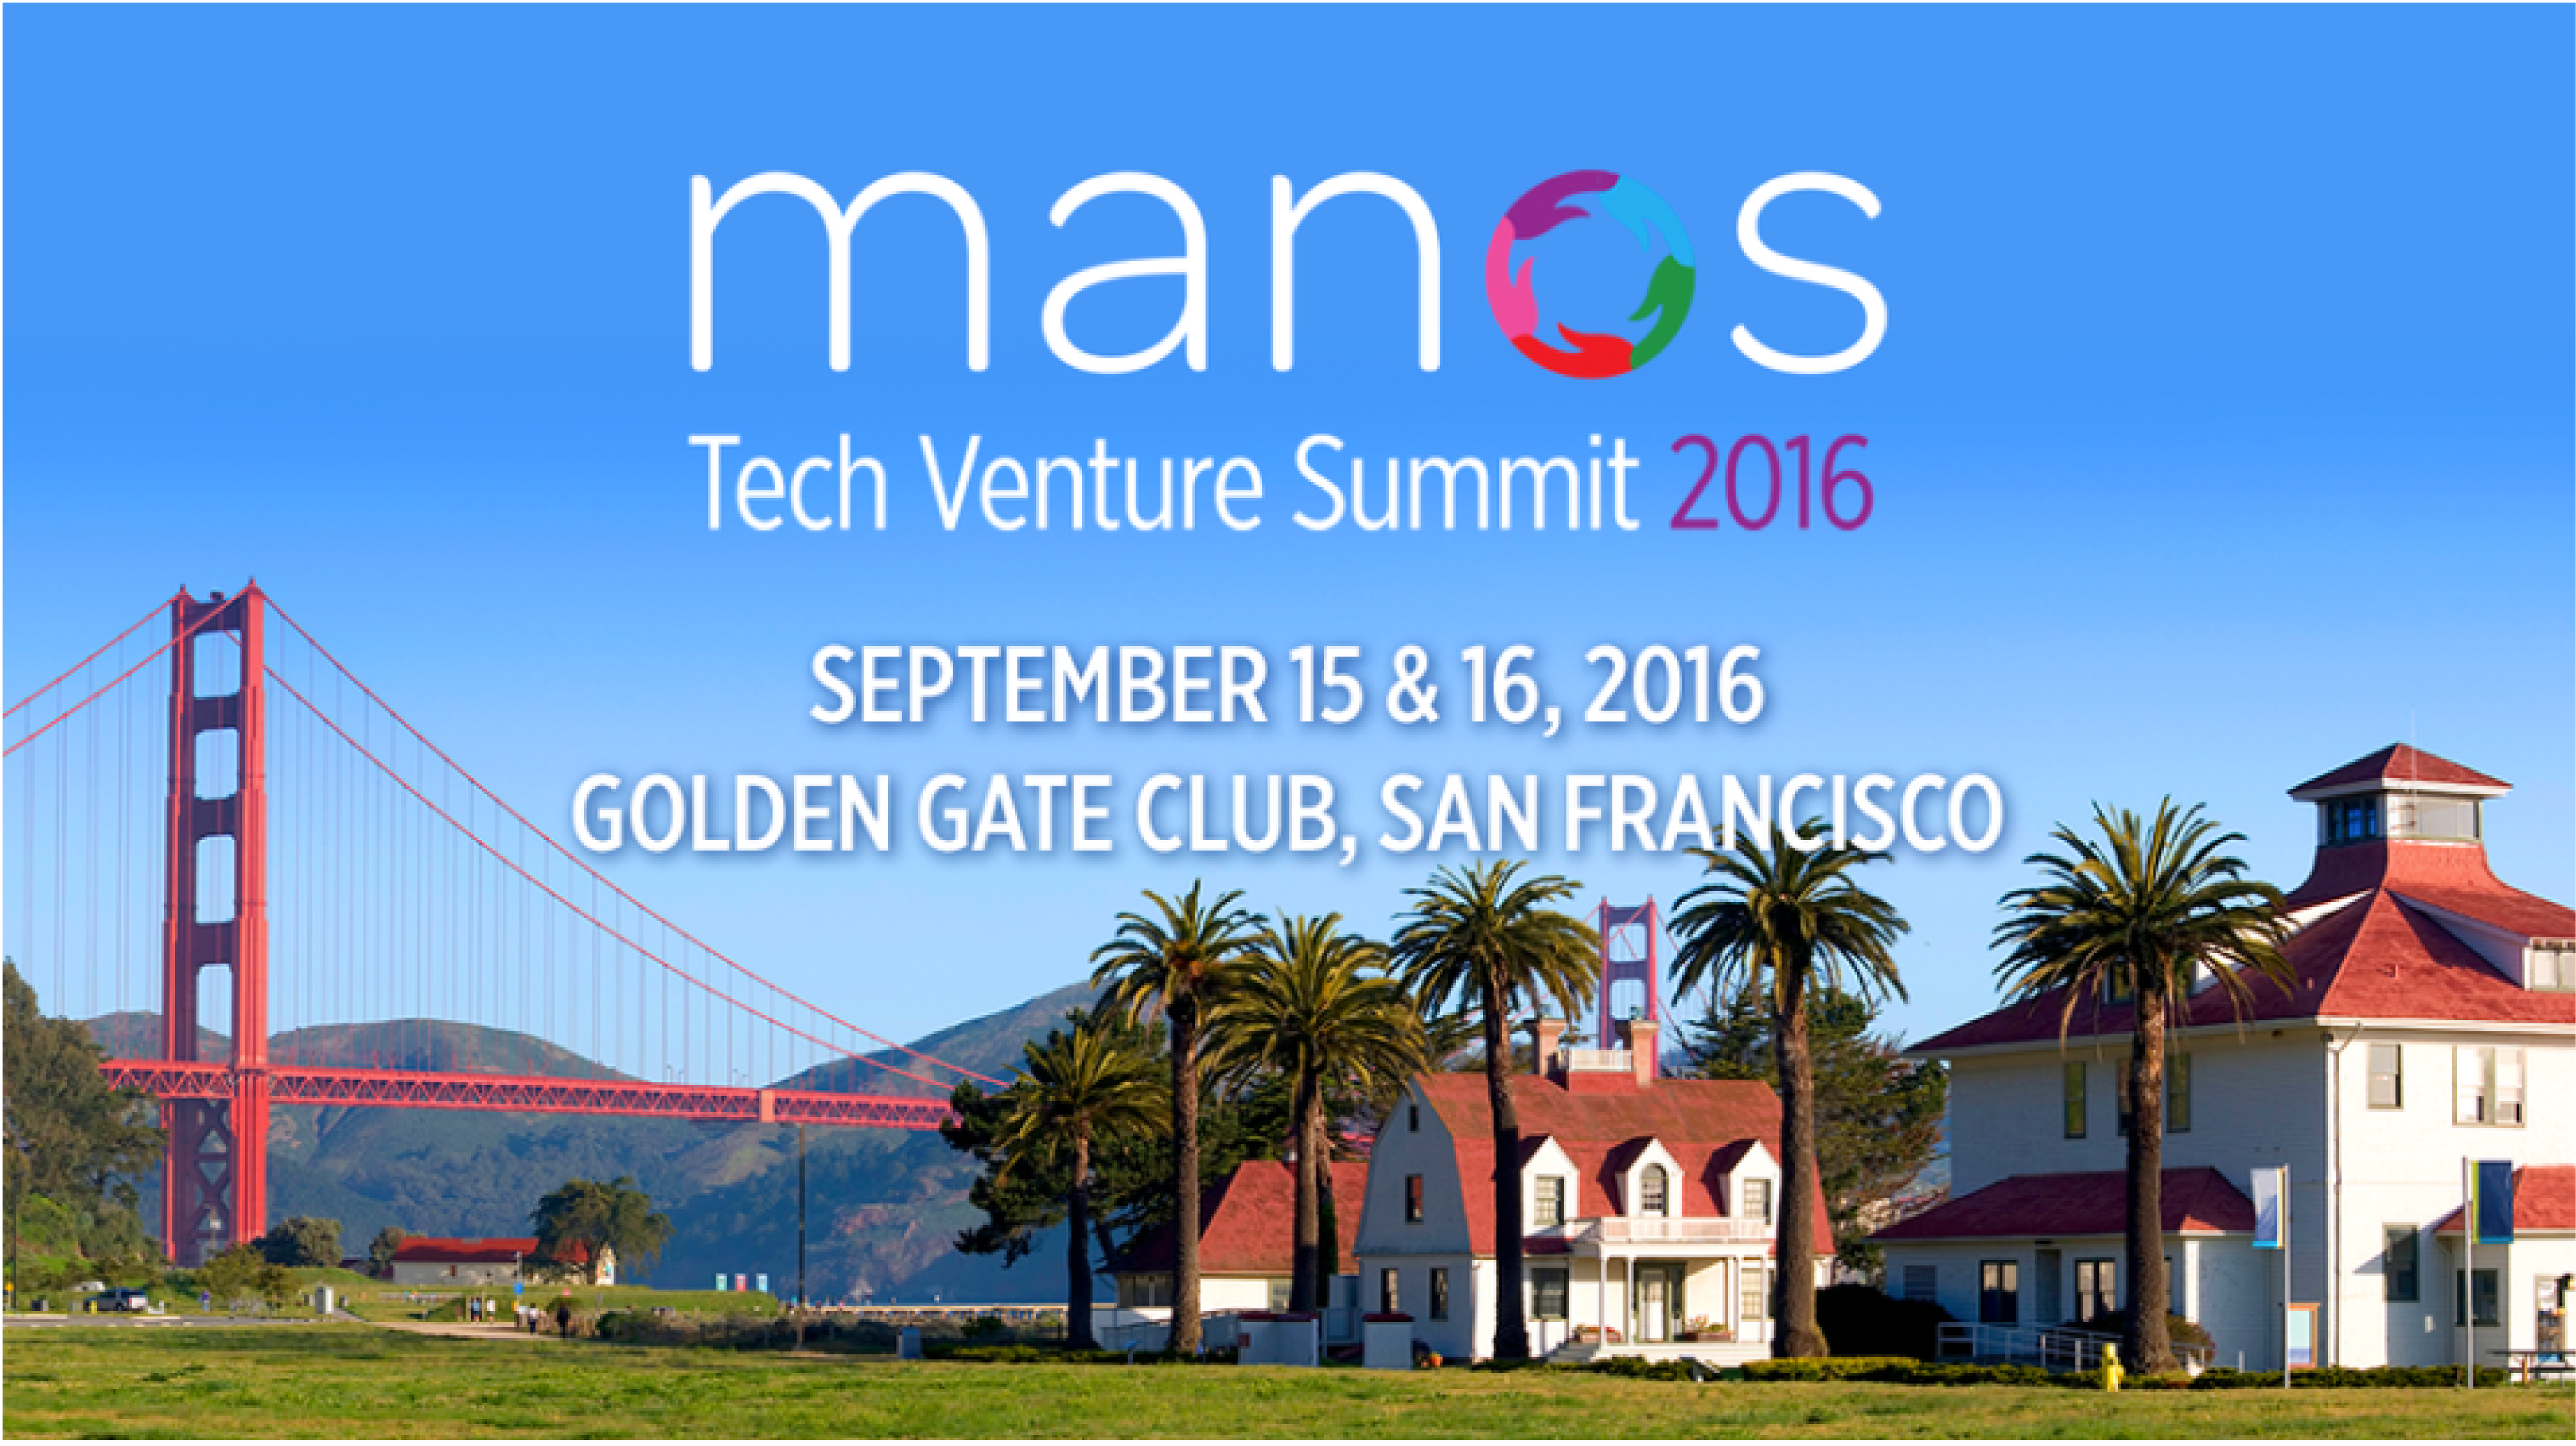 Manos Accelerator Hosts its Inaugural Tech Venture Summit at the Golden Gate Club in the Presidio of San Francisco